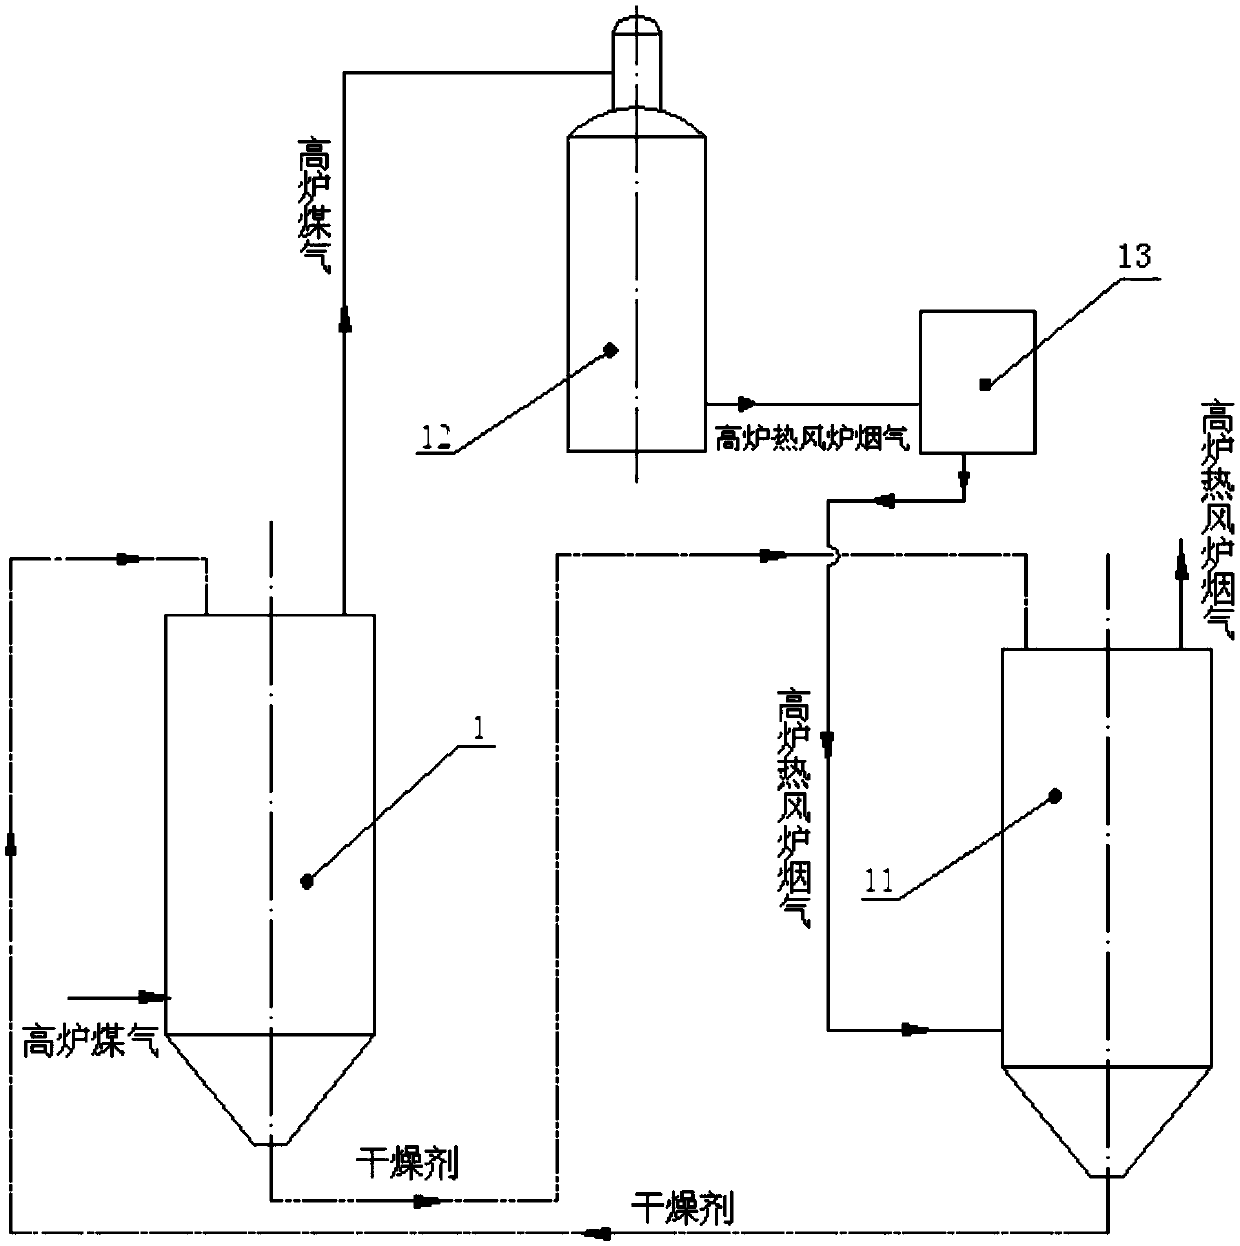 A system for drying blast furnace gas with residual heat from flue gas from hot blast stove